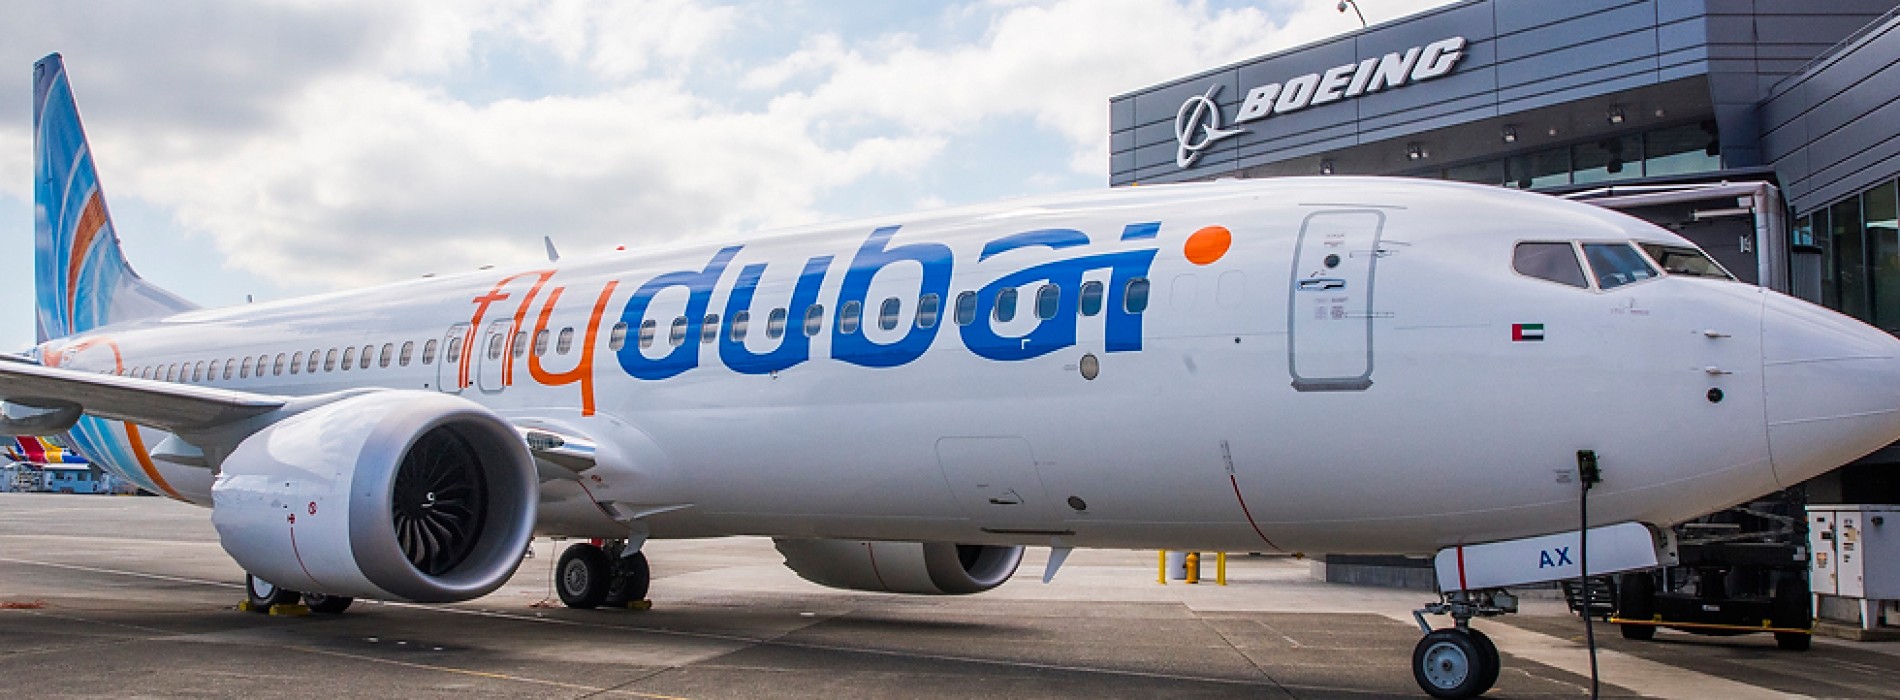 Boeing delivers first 737 MAX 8 to flydubai